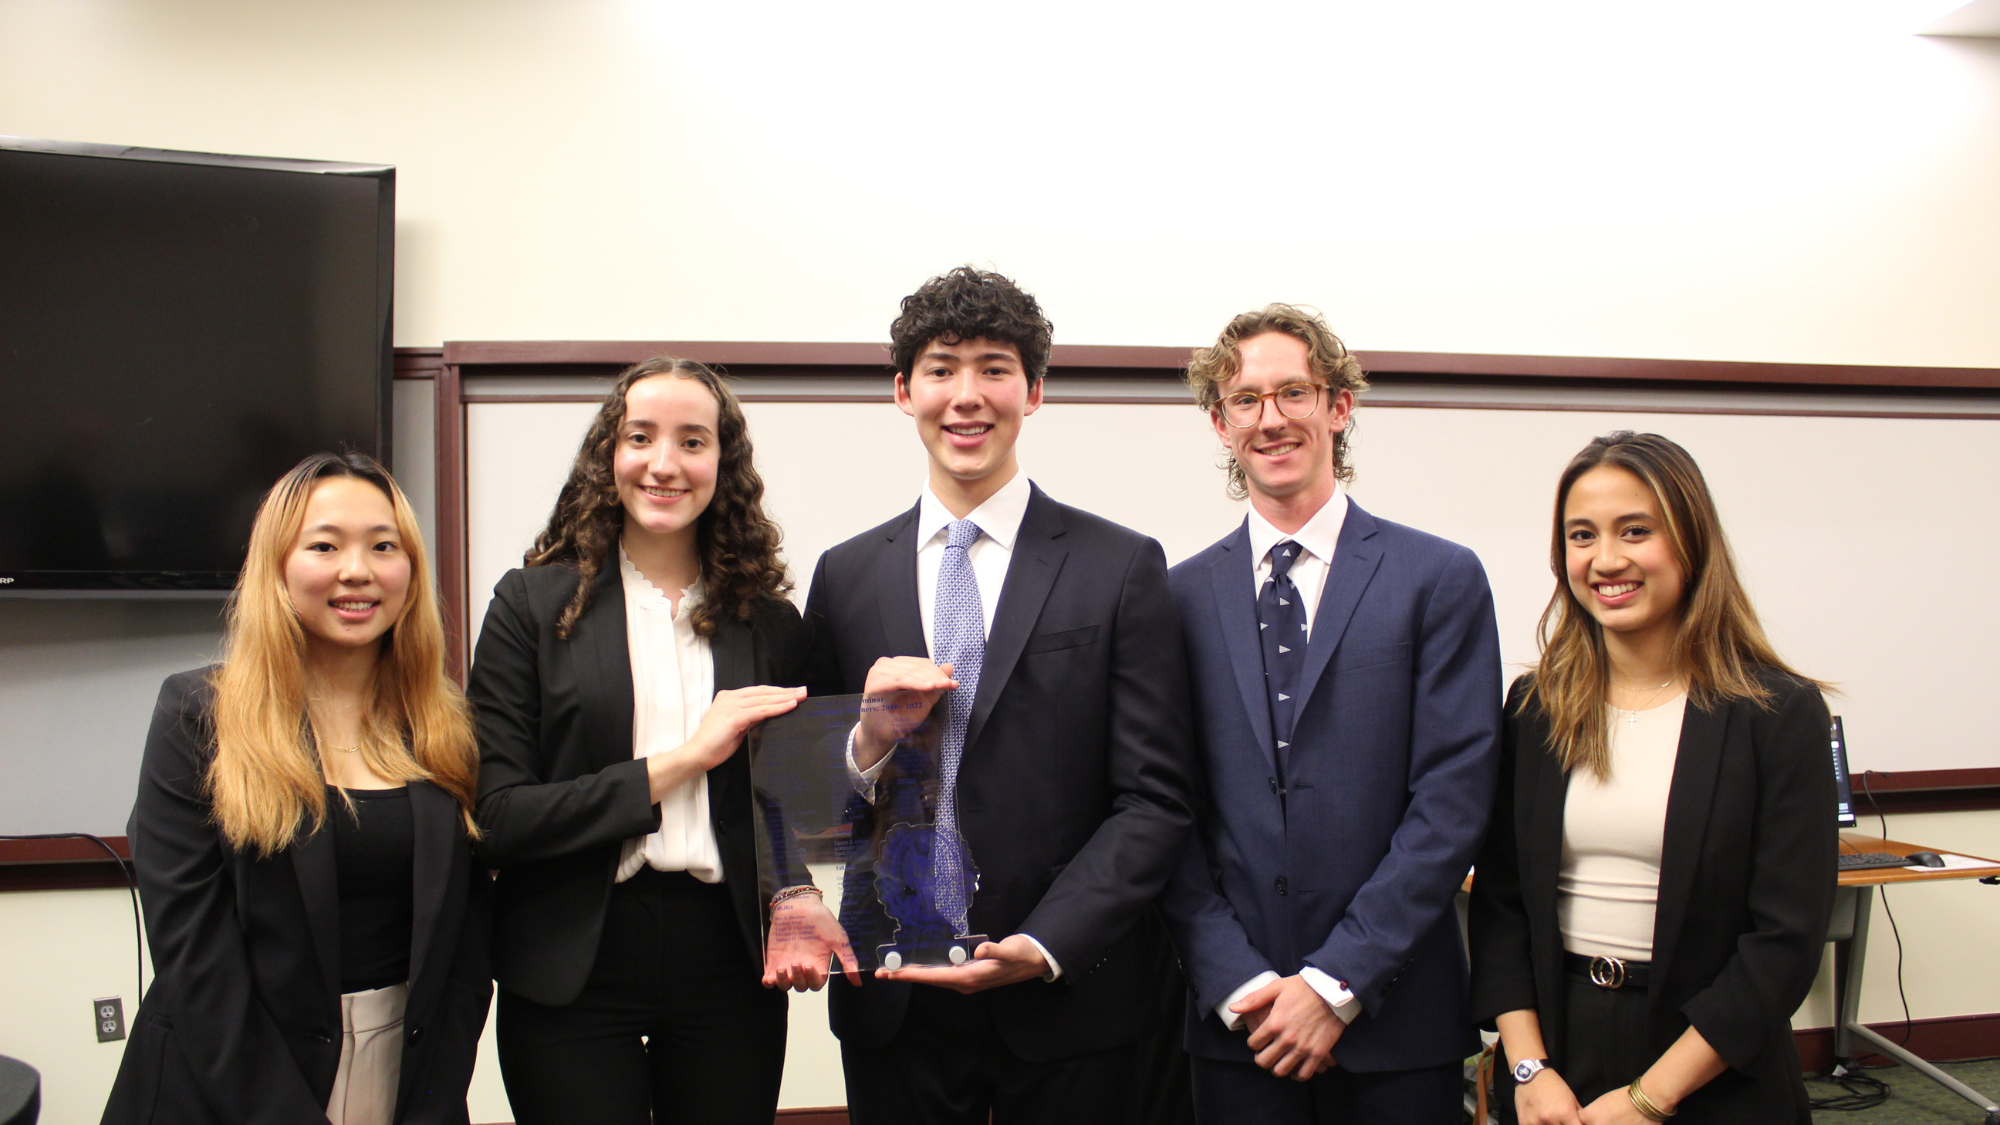 Undergraduate students celebrate a win in the case competition